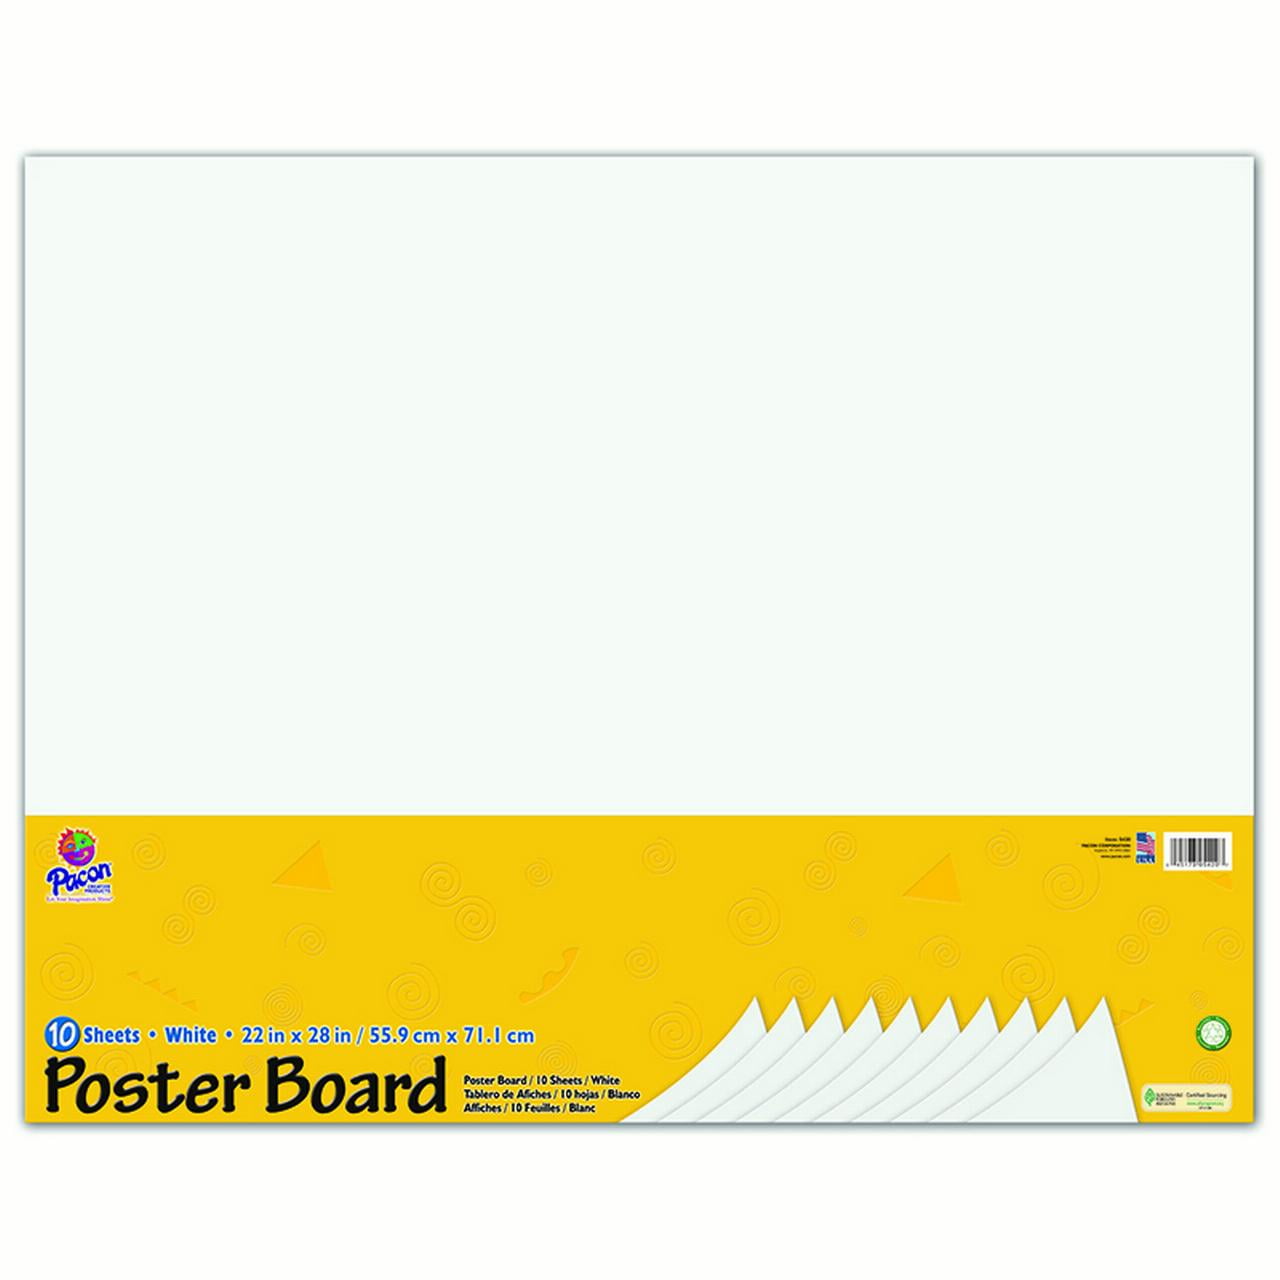 Pacon Super Value Poster tGjTNv Board 50 Sheets White 22 in X 28 in 